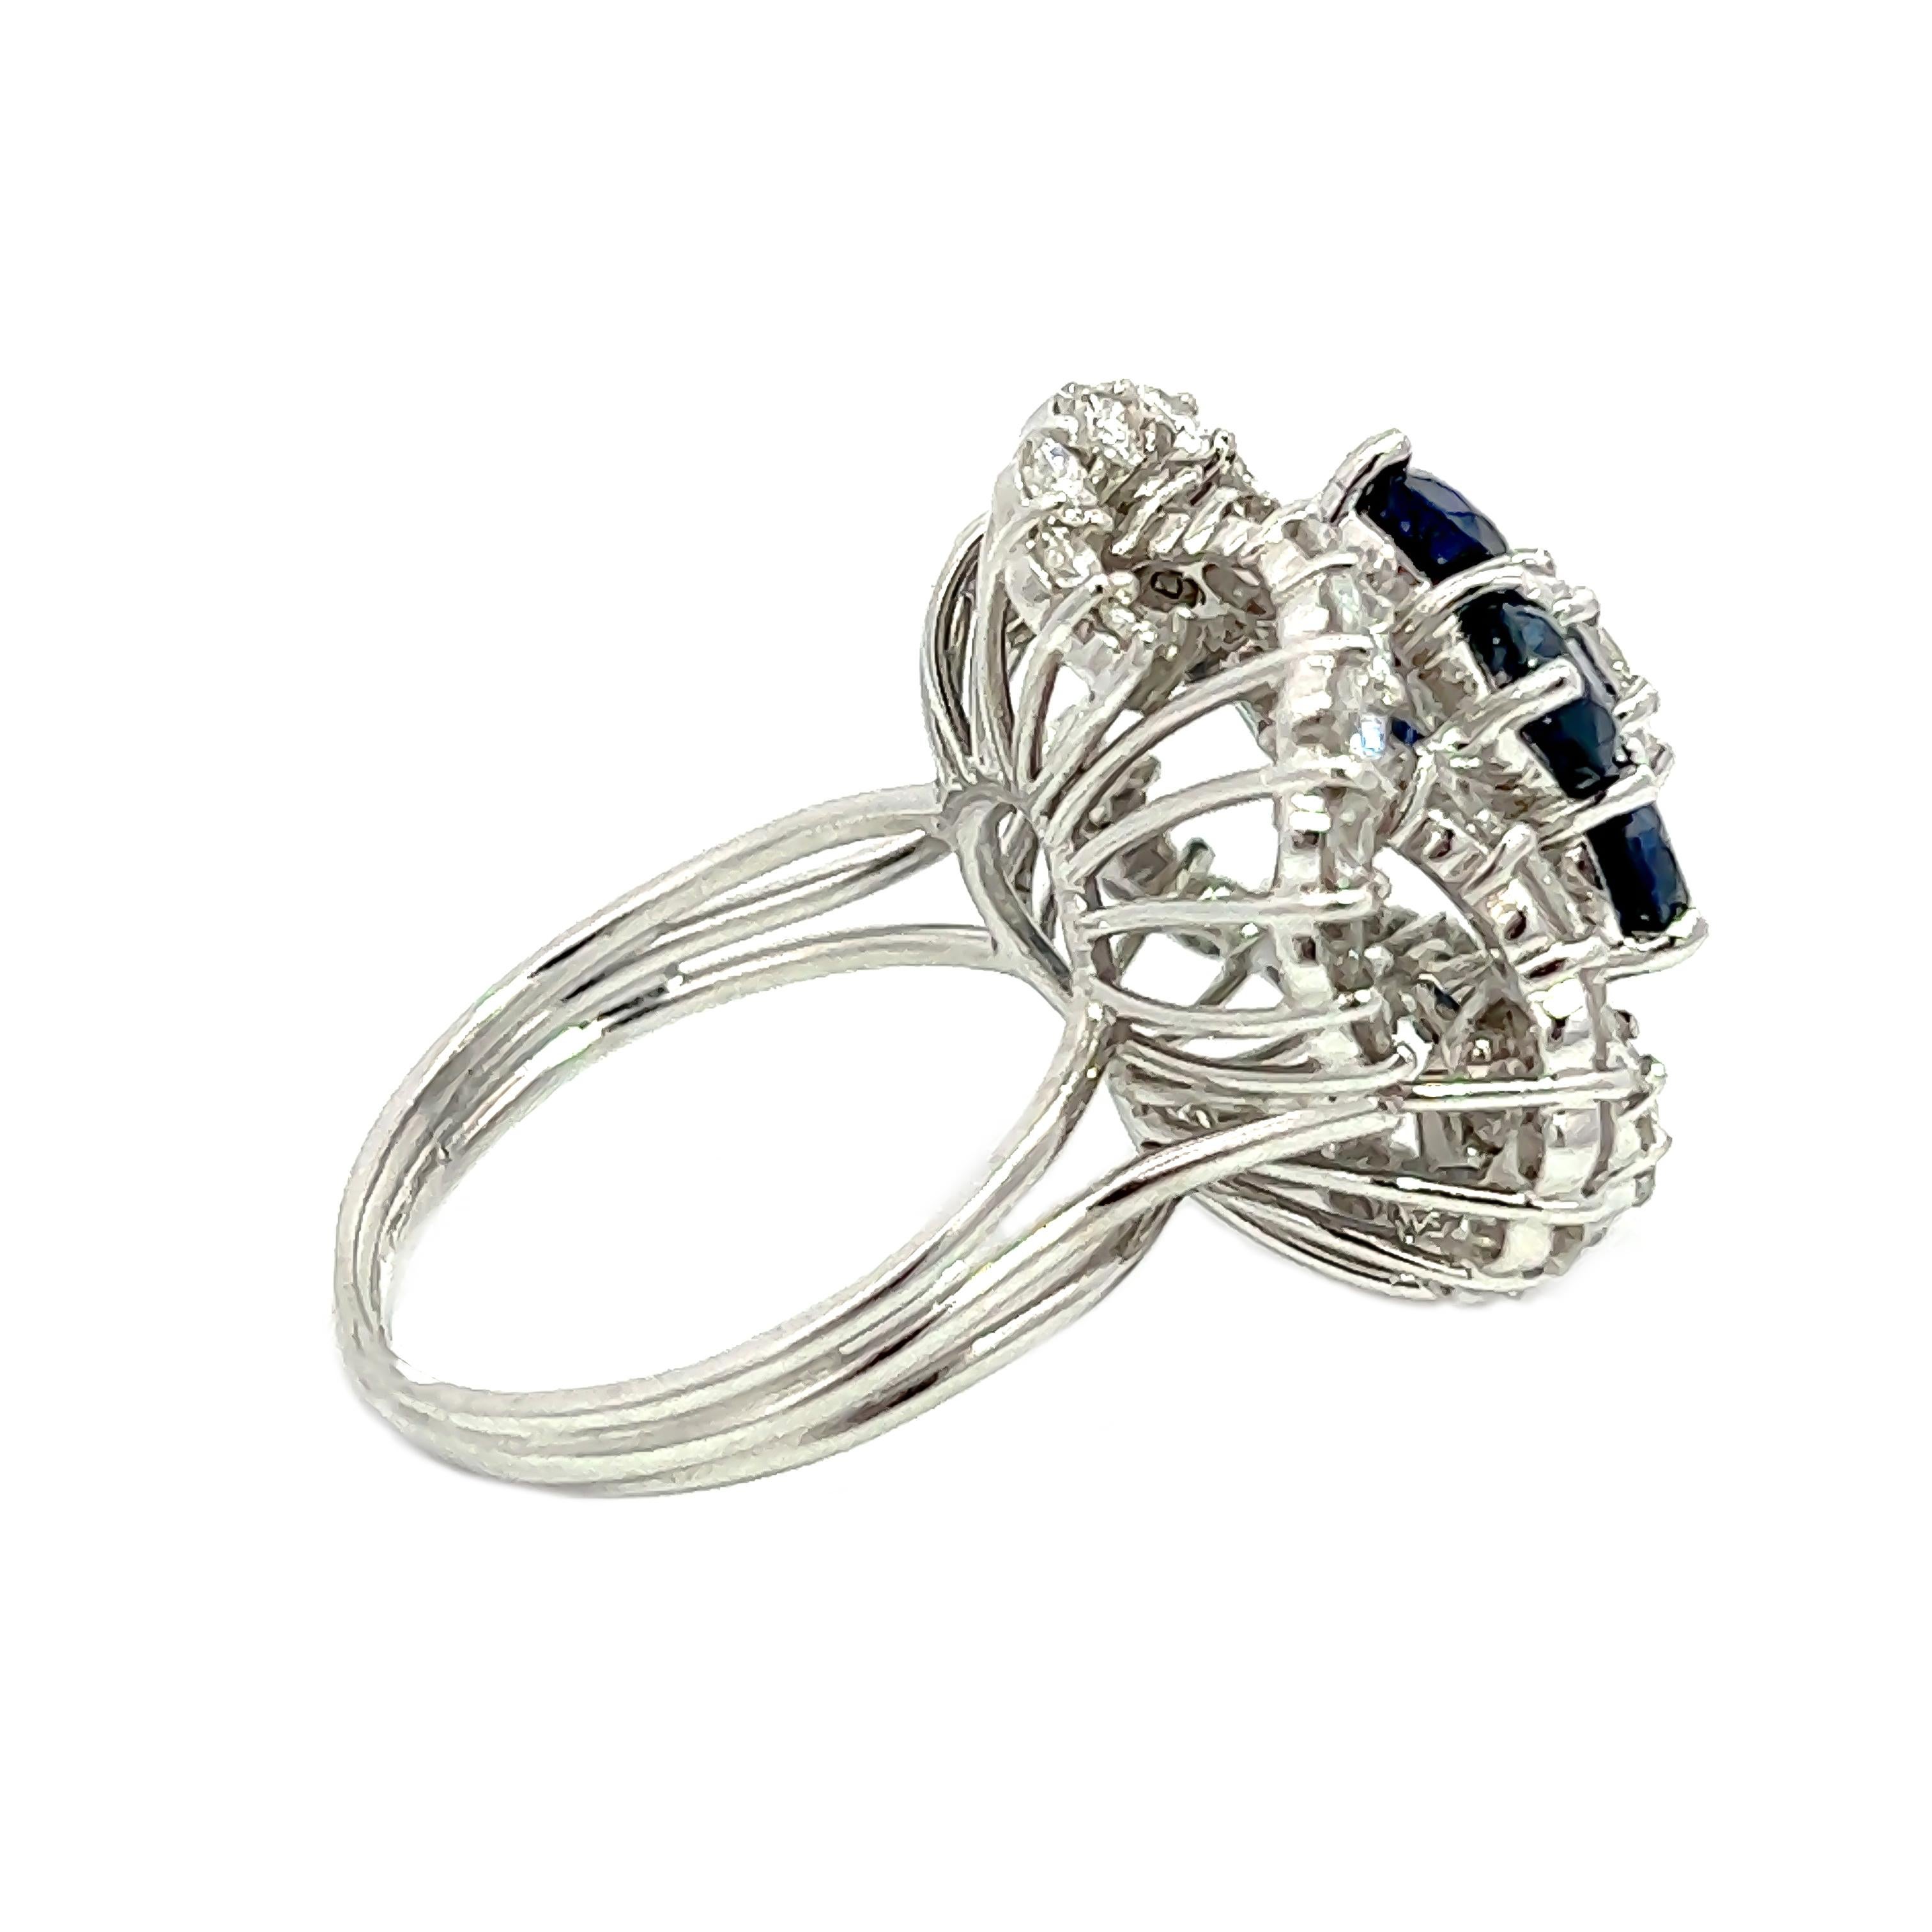 Round Cut 6.41CT Total Weight Blue Sapphire & Diamonds Ring For Sale